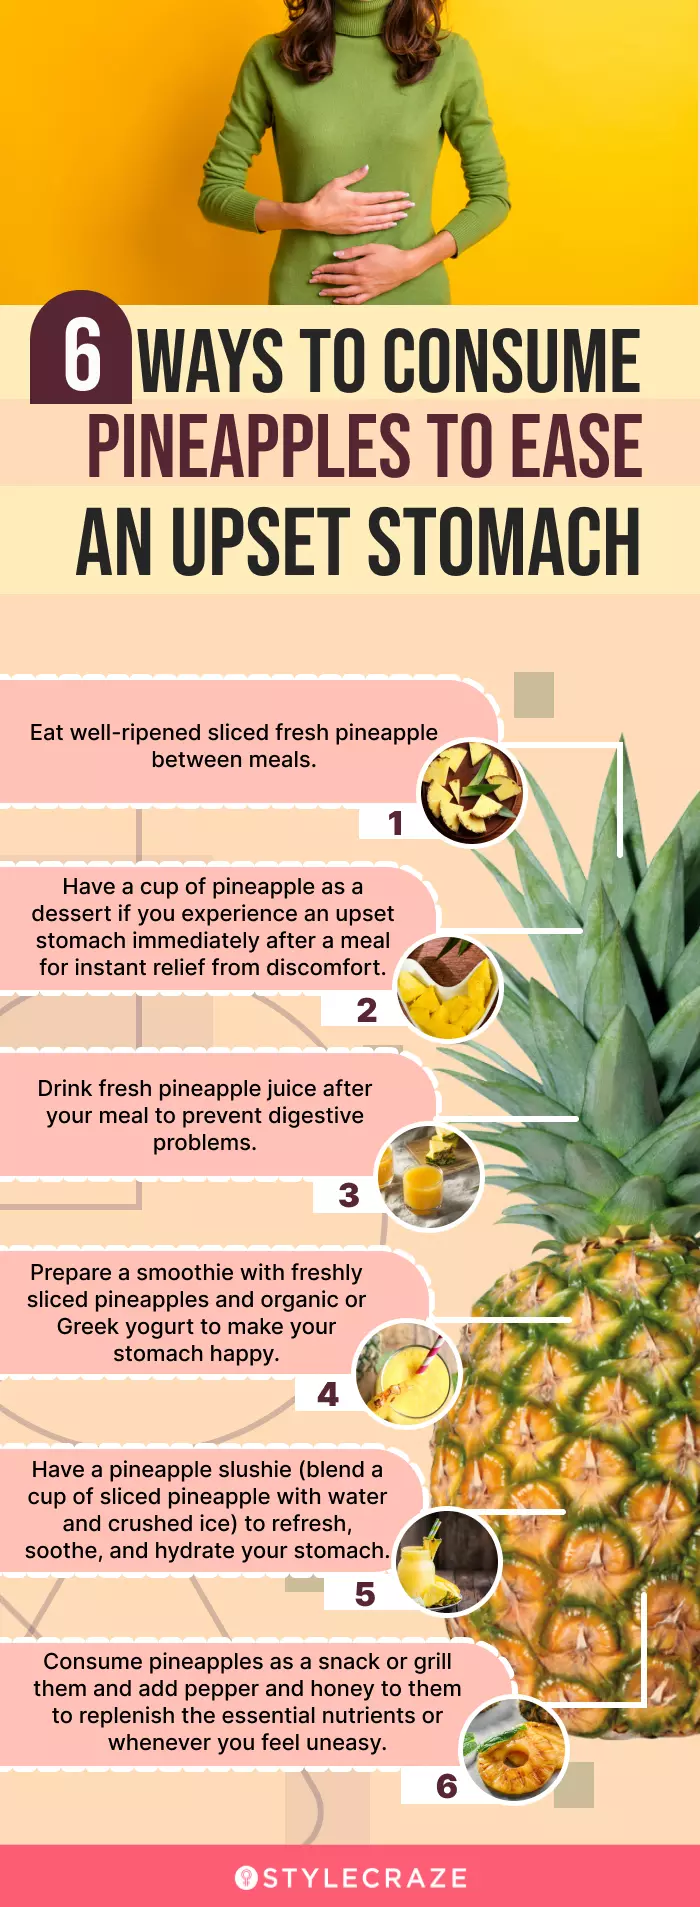 6 ways to consume pineapples to ease an upset stomach (infographic)